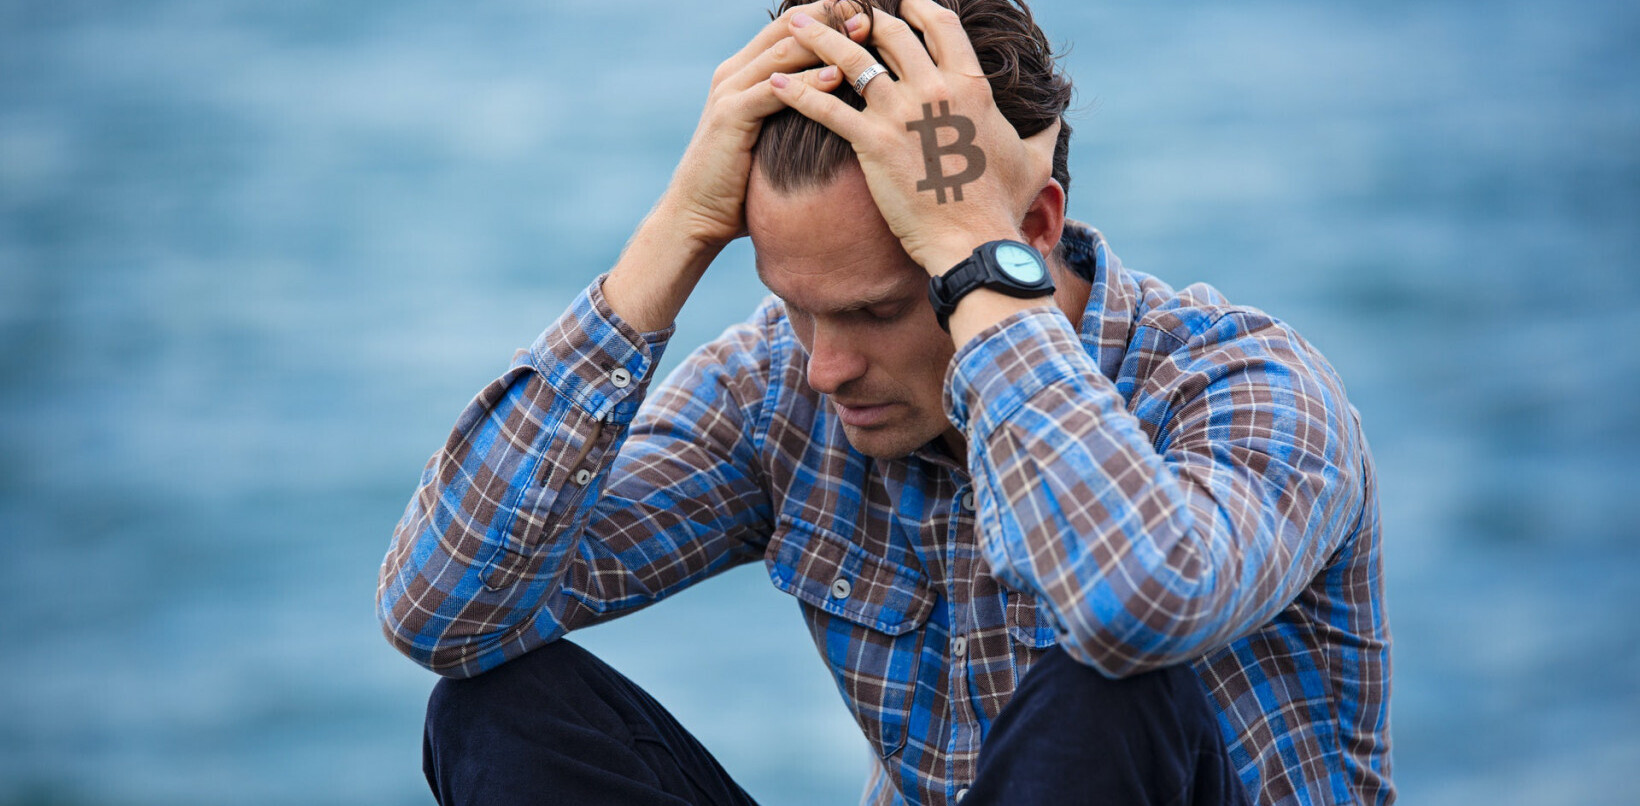 So you received the Bitcoin ‘masturbation vid’ email — here’s what to do